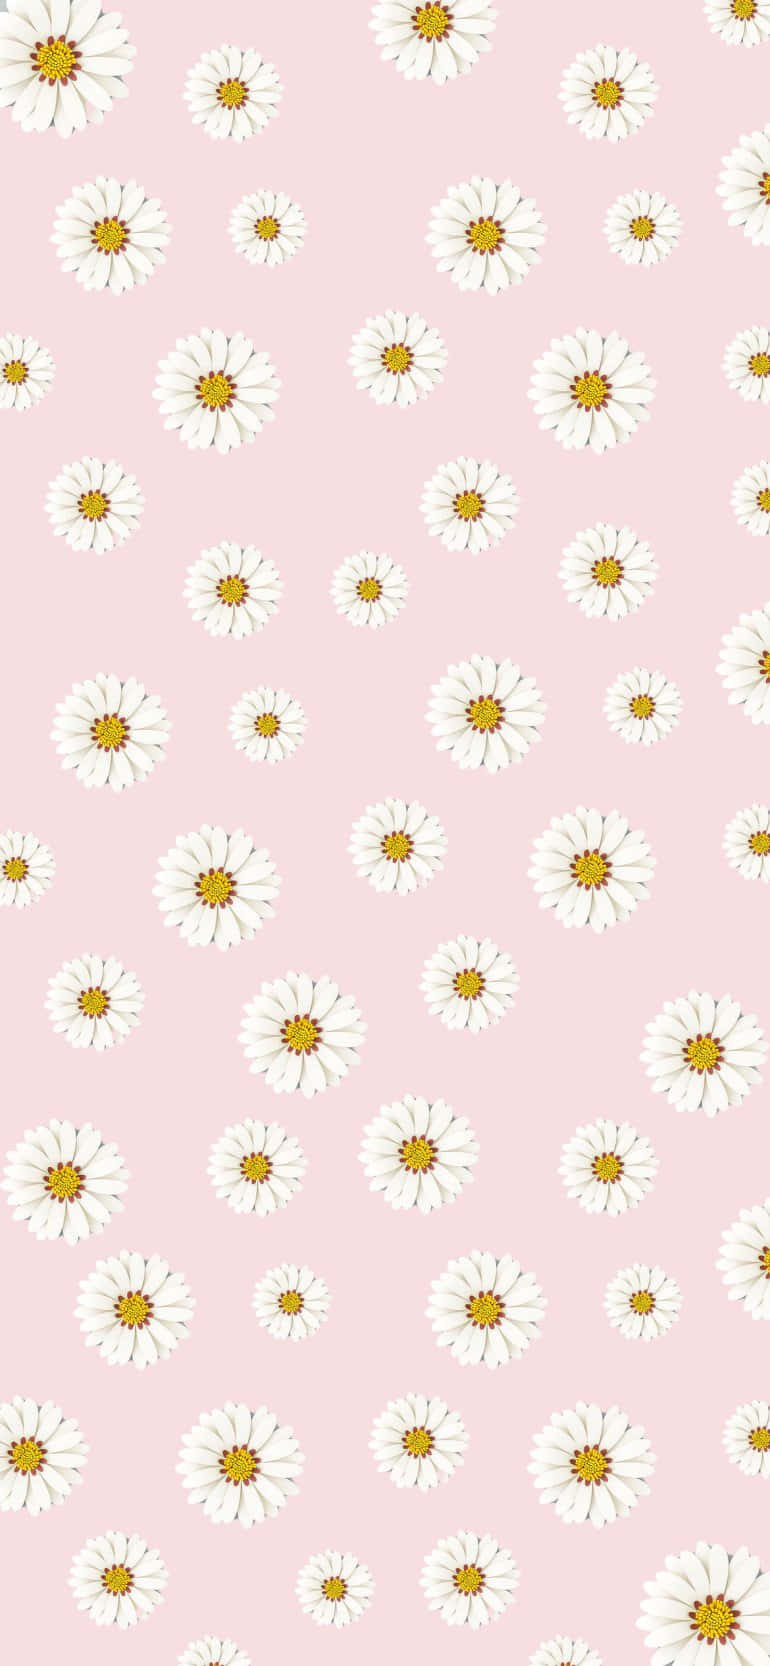 Daisy Pattern Design Pink Aesthetic Background